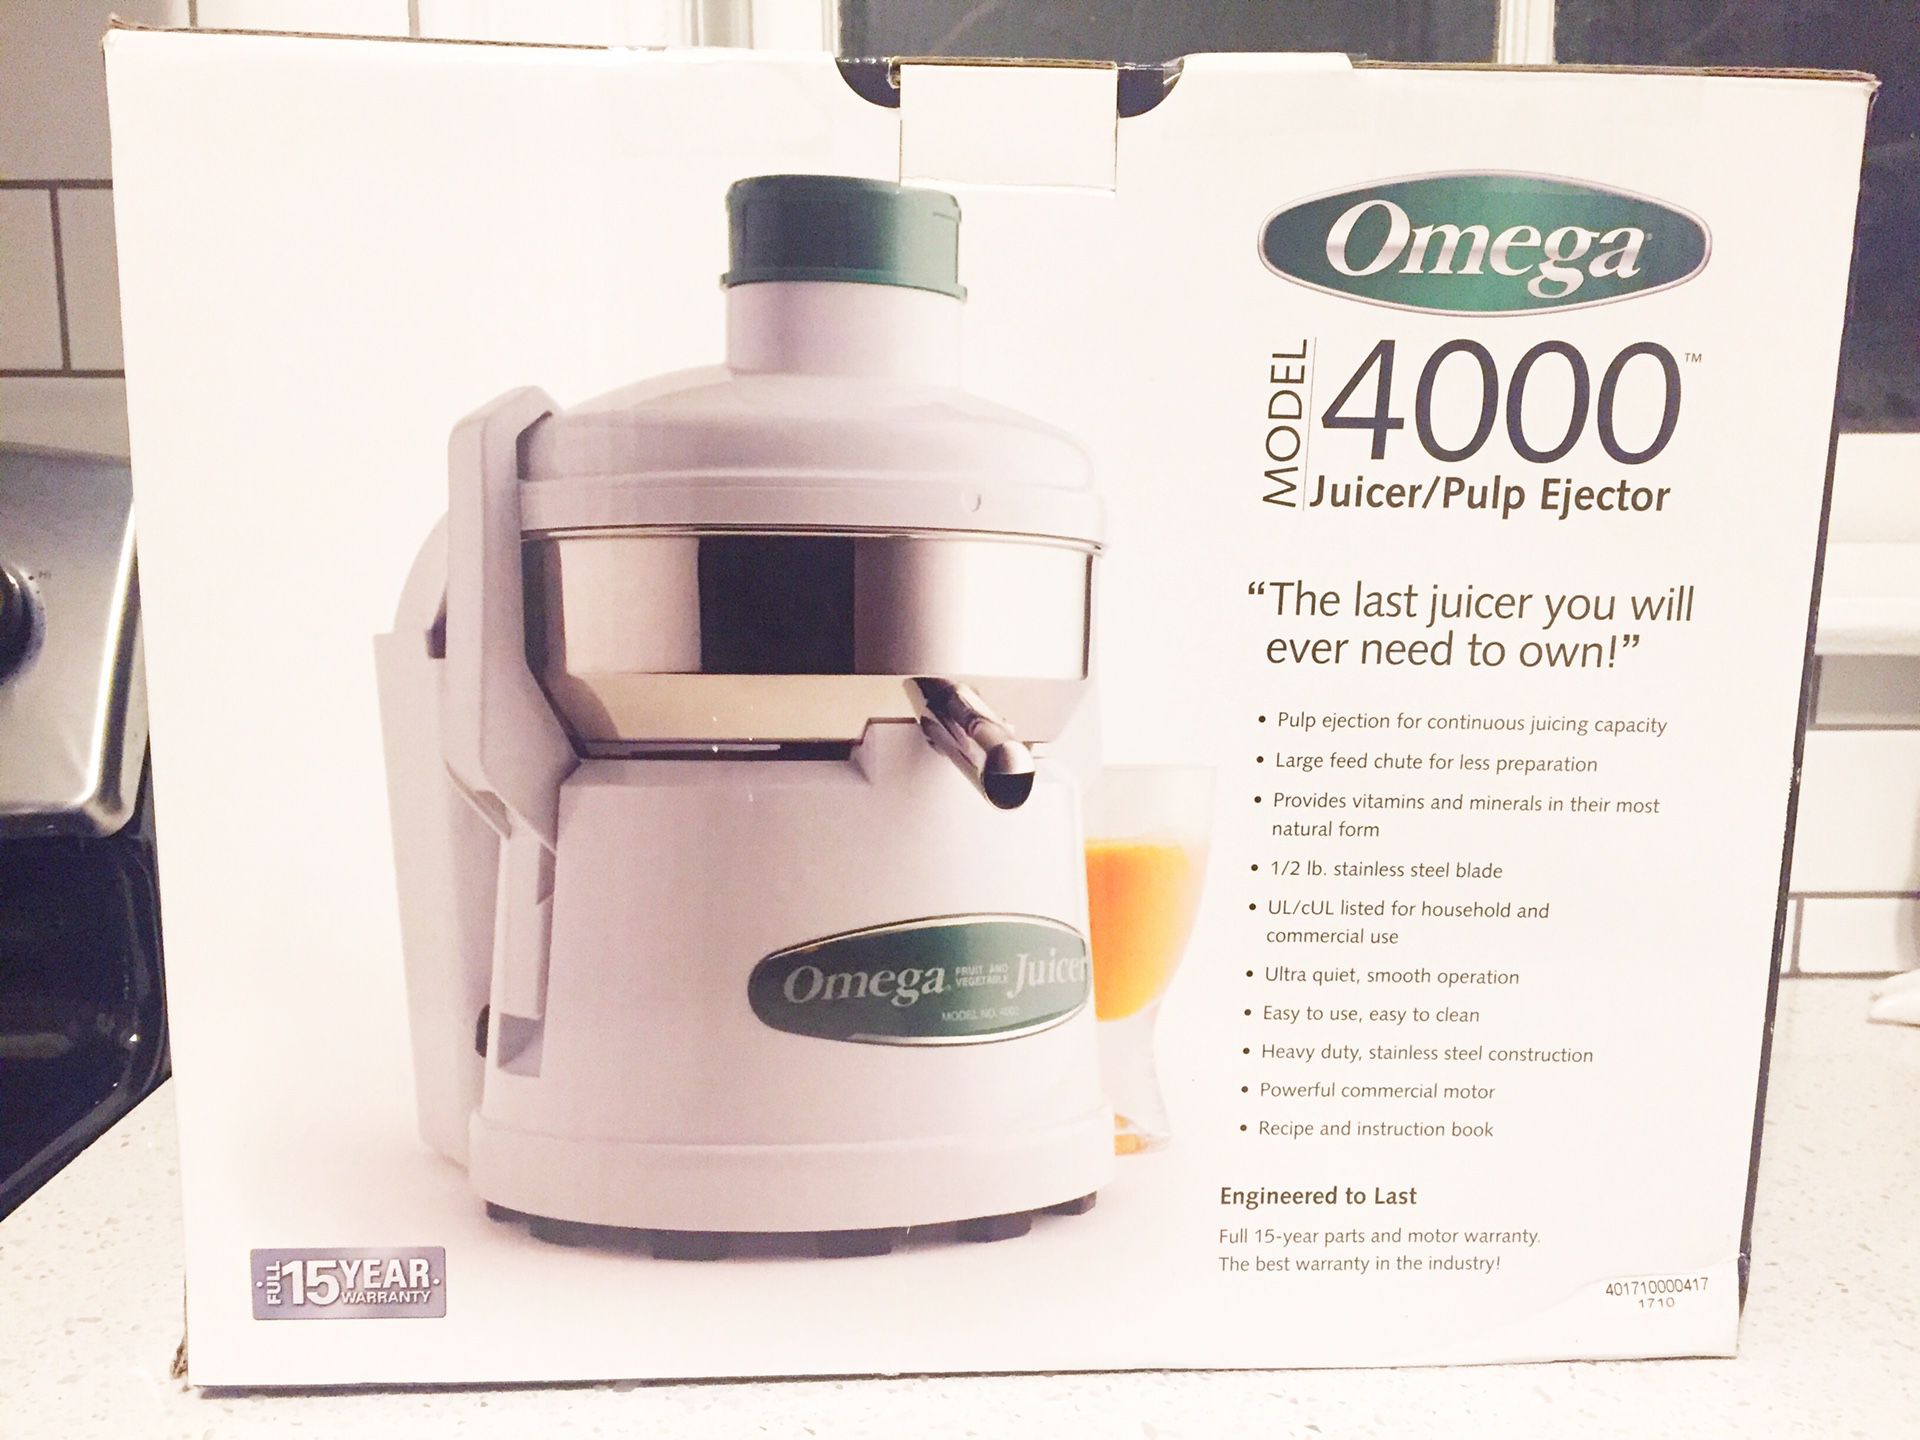 Omega 4000 Juicer/Pulp Ejector New in Box